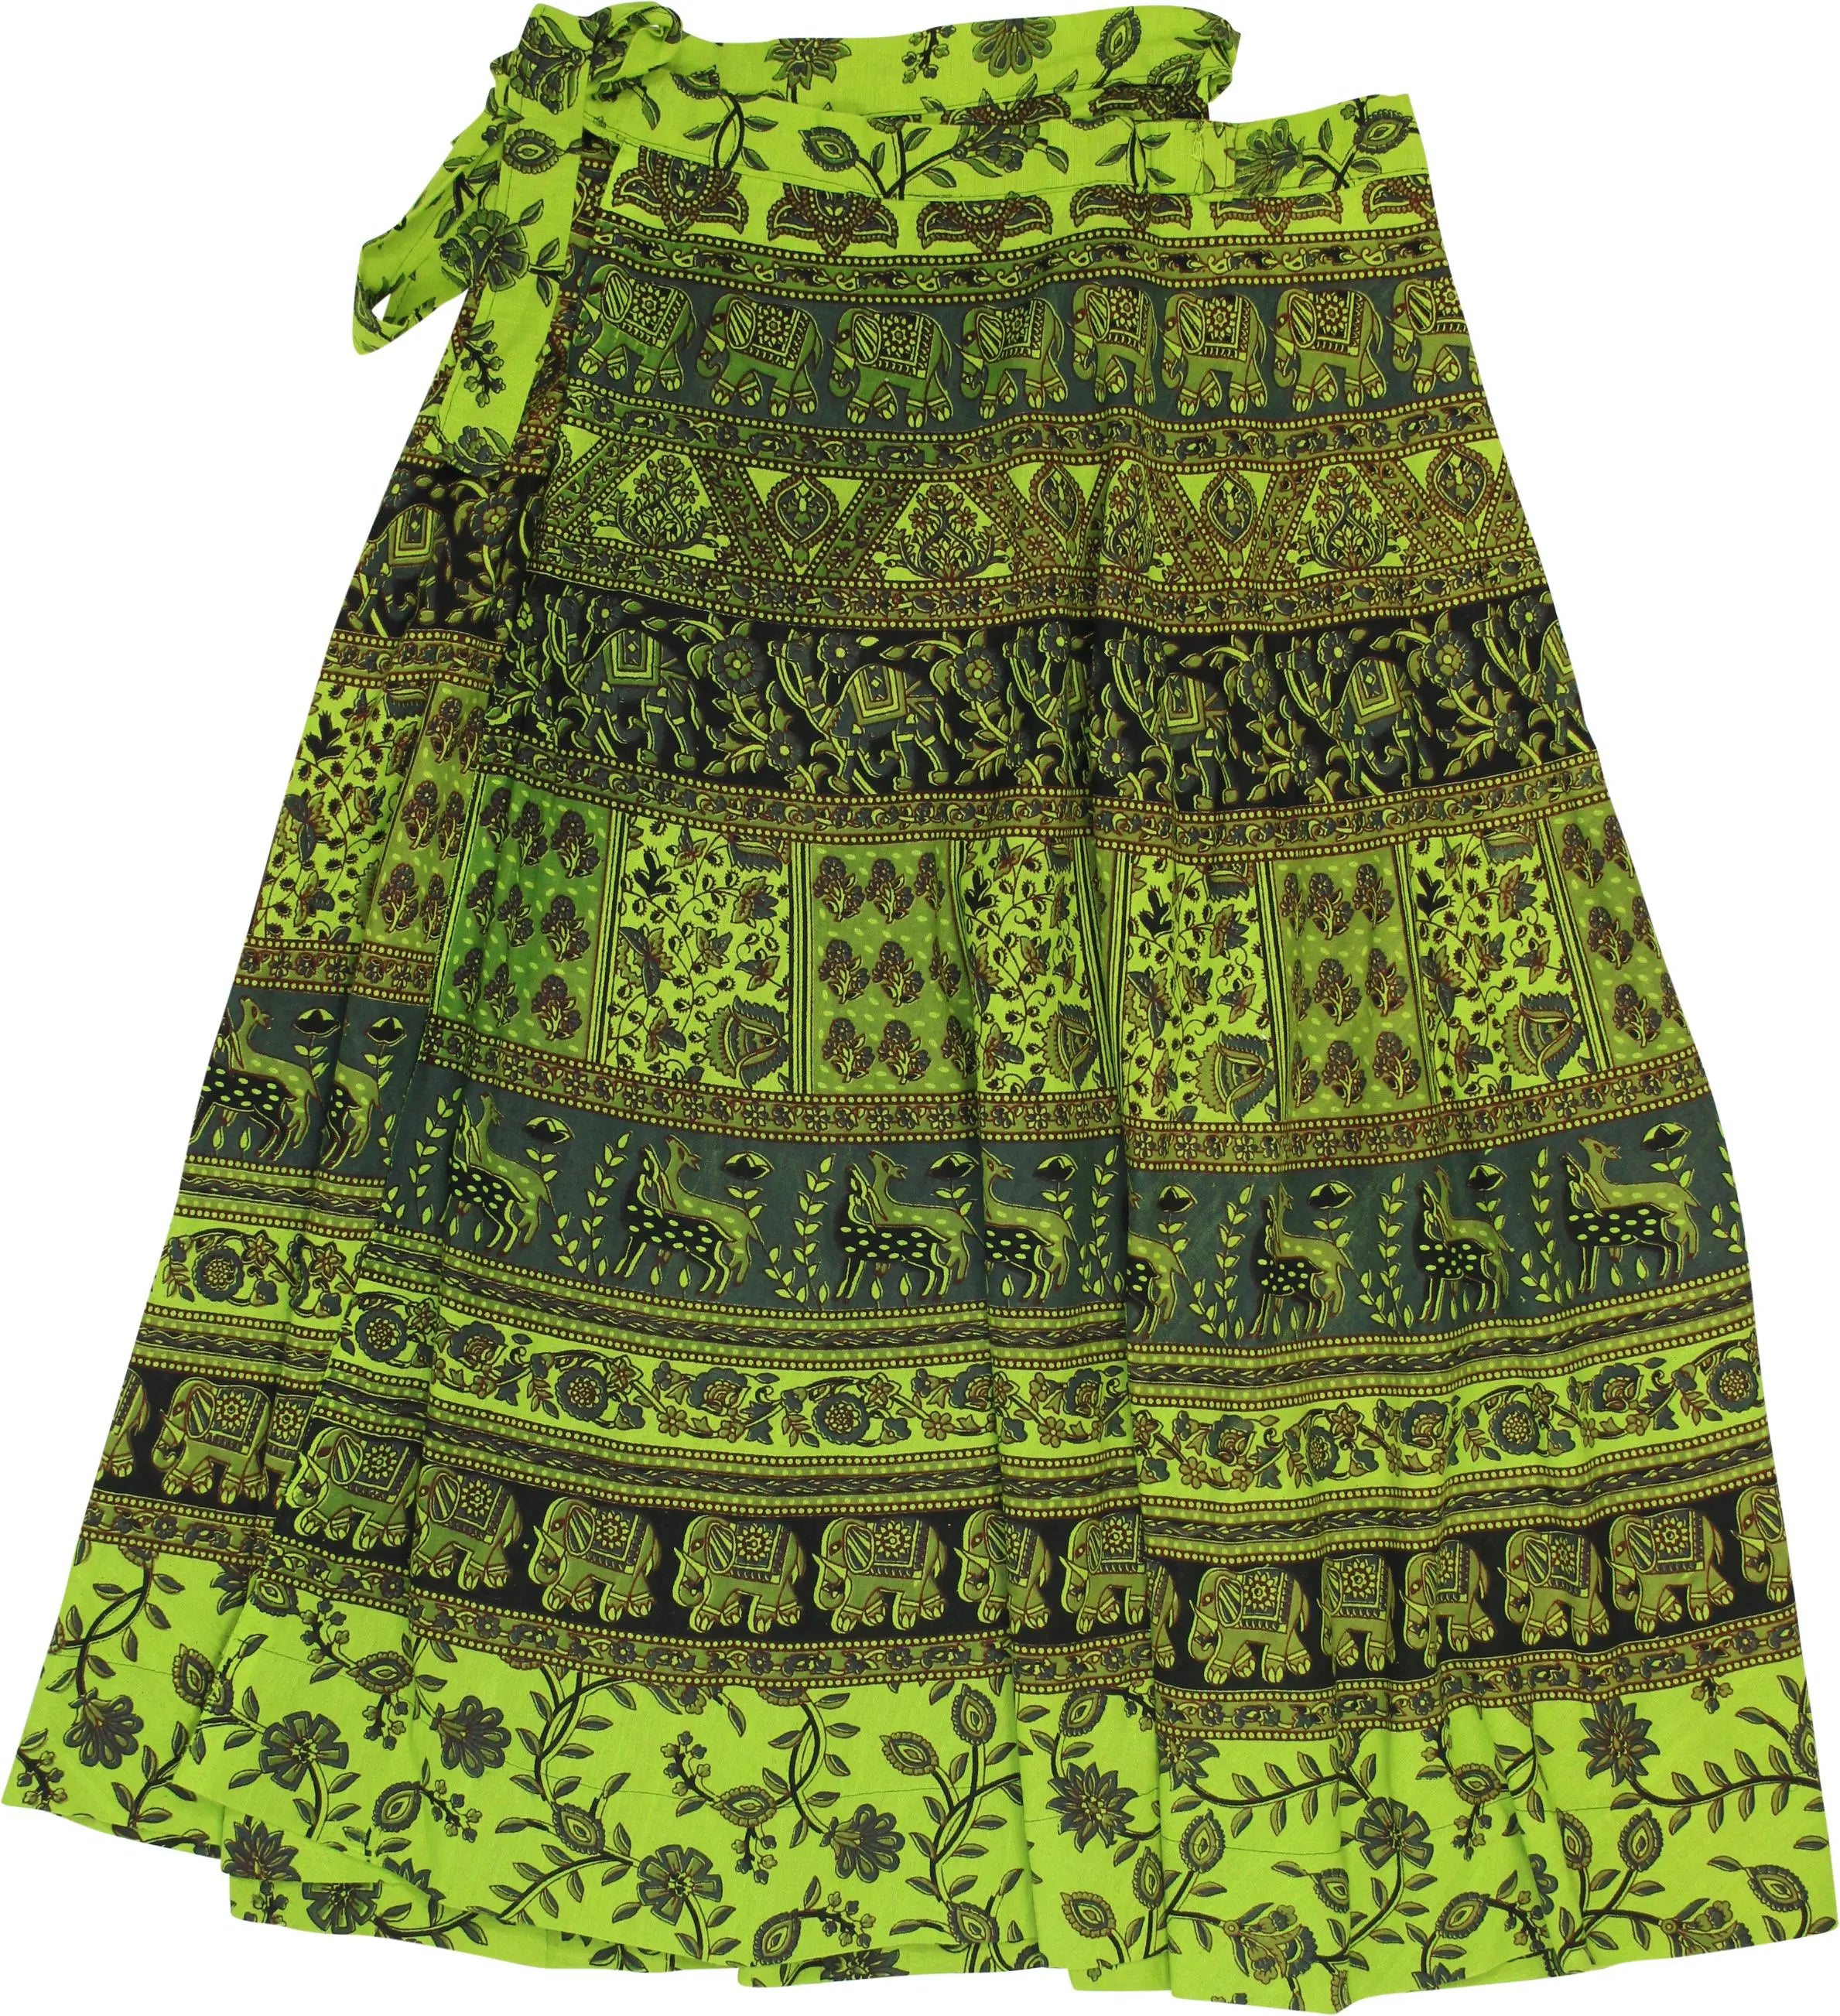 Unknown - Patterned Wrap Skirt- ThriftTale.com - Vintage and second handclothing